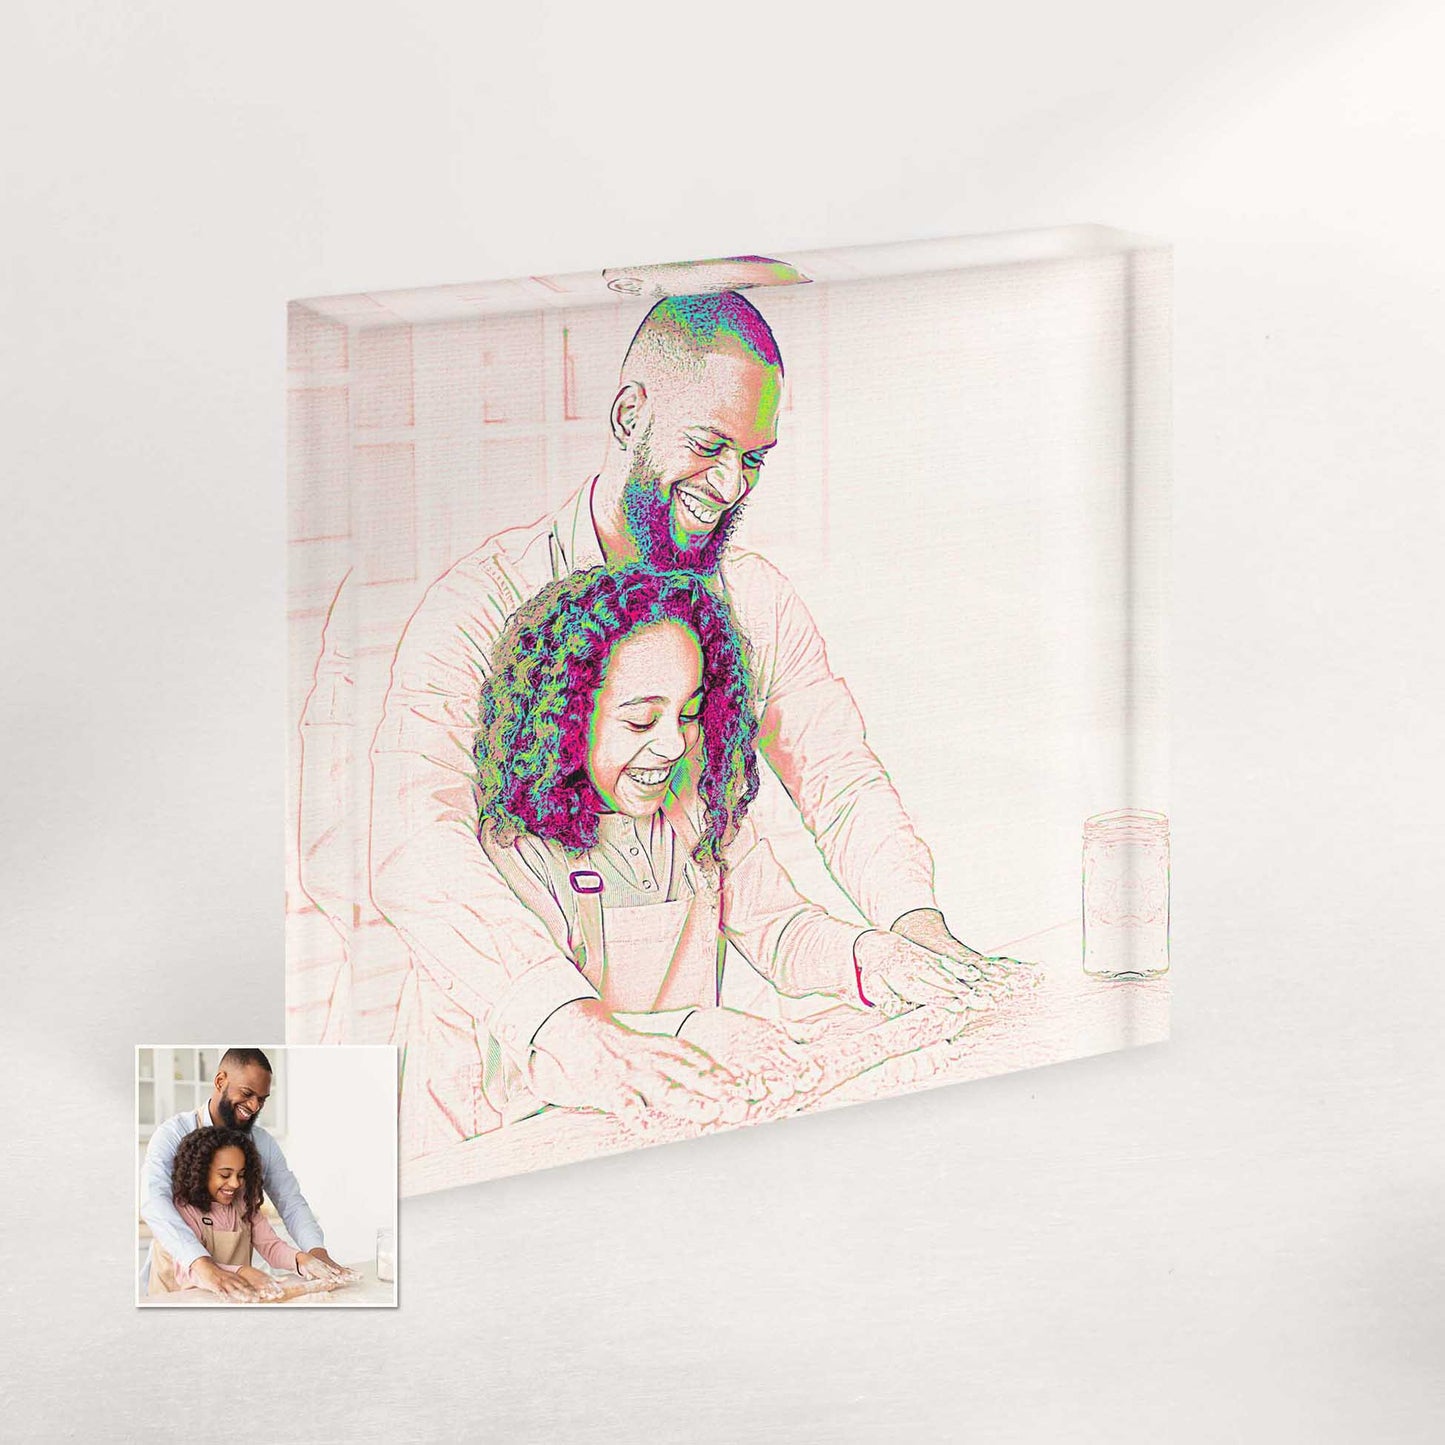 Family Wedding Gift: Personalized Pencil Drawing Acrylic Block Photo: Commemorate the joyous union of your loved ones with this heartfelt gift. The artist skillfully transforms a wedding photograph into a stunning pencil